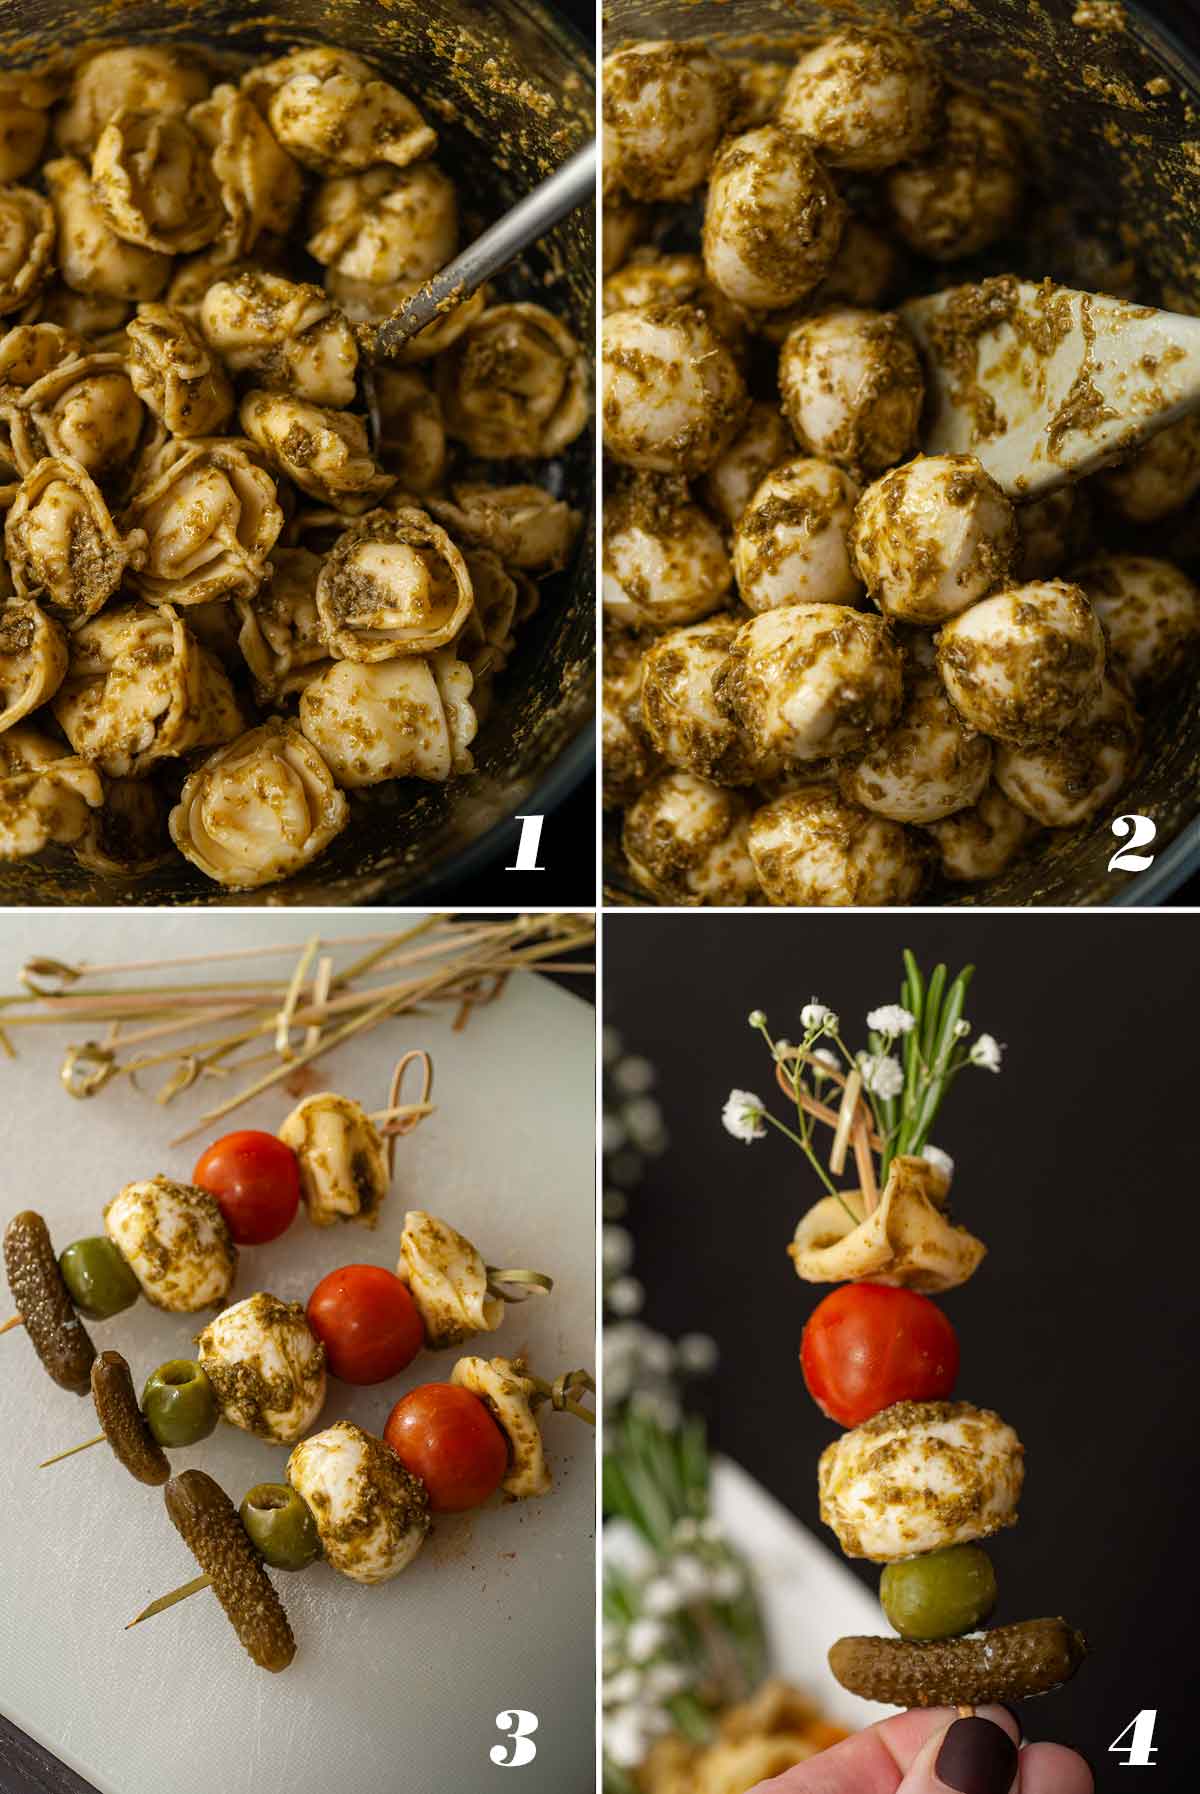 A collage of 4 numbered images showing how to make antipasti.